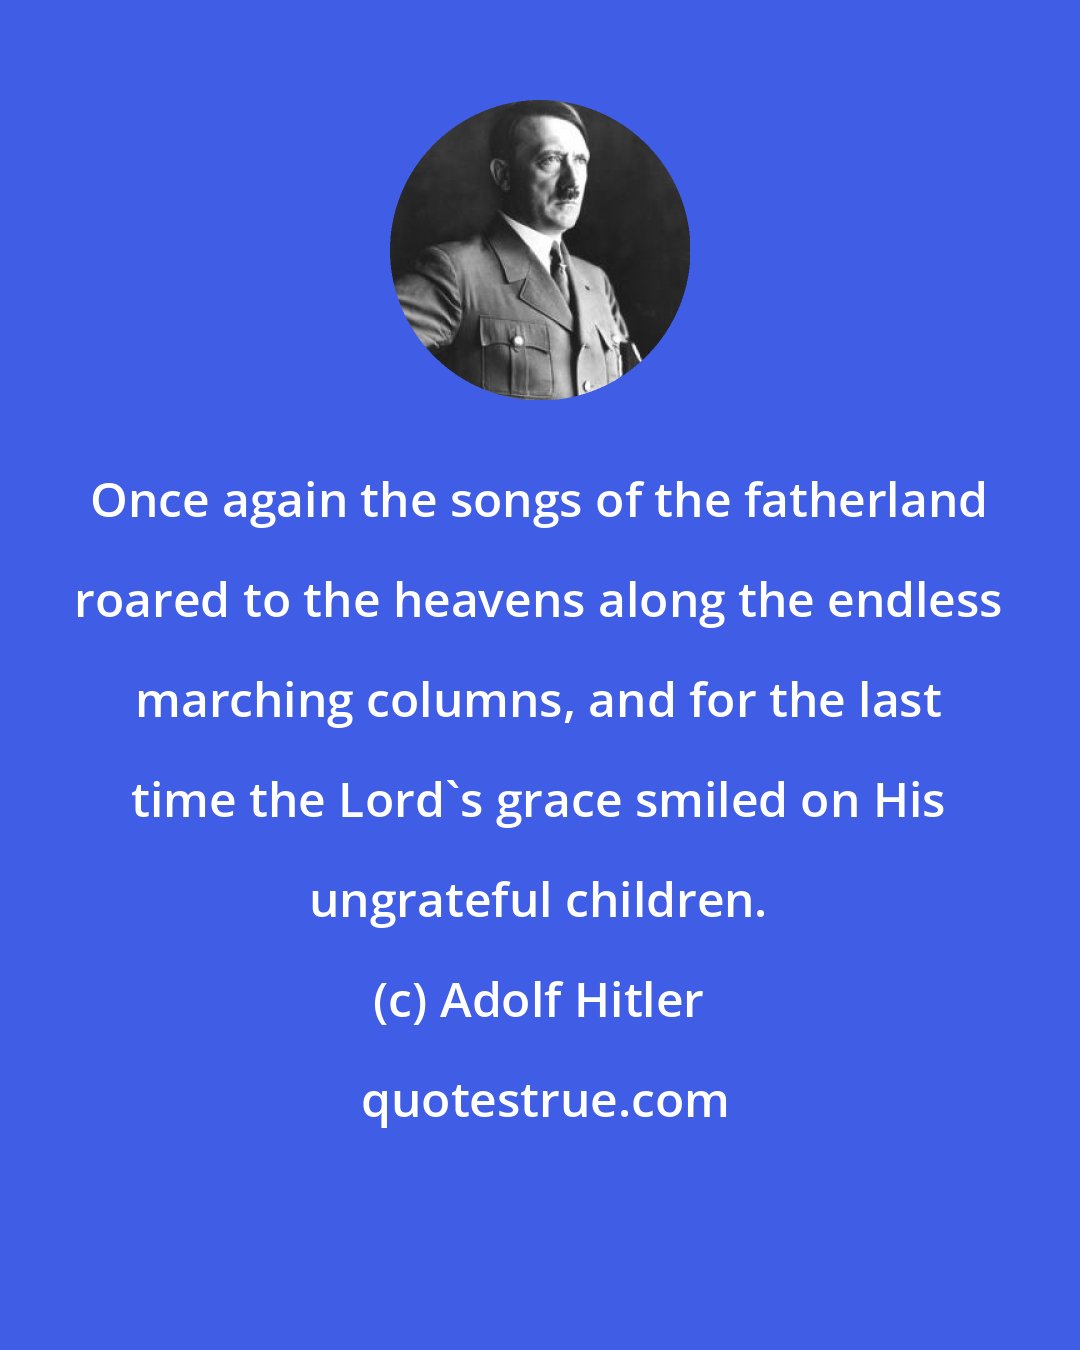 Adolf Hitler: Once again the songs of the fatherland roared to the heavens along the endless marching columns, and for the last time the Lord's grace smiled on His ungrateful children.